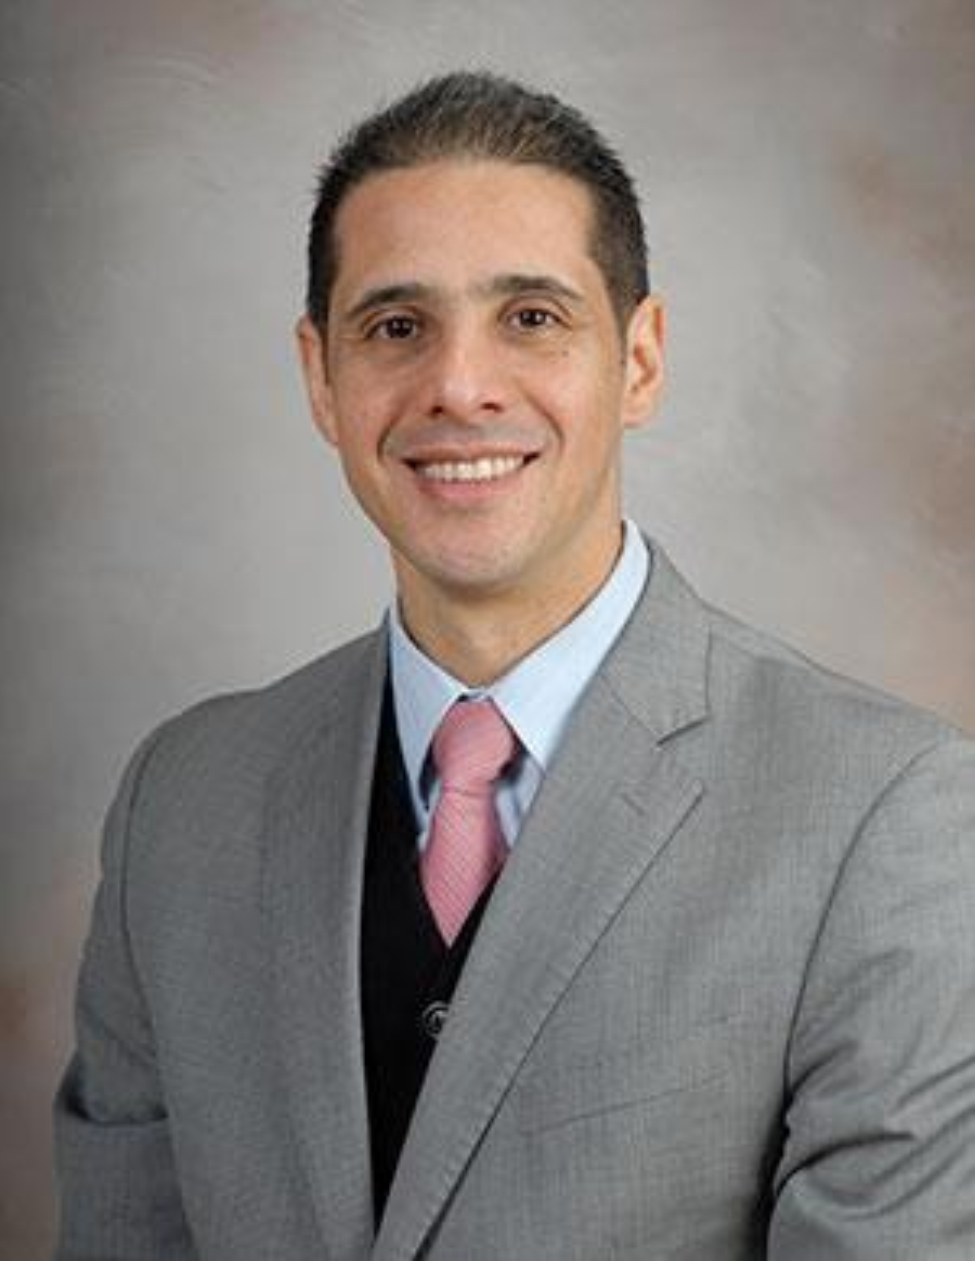 Cesar A. Arias, MD, MSc, PhD, the study’s principal investigator. (Photo by: UTHealth).